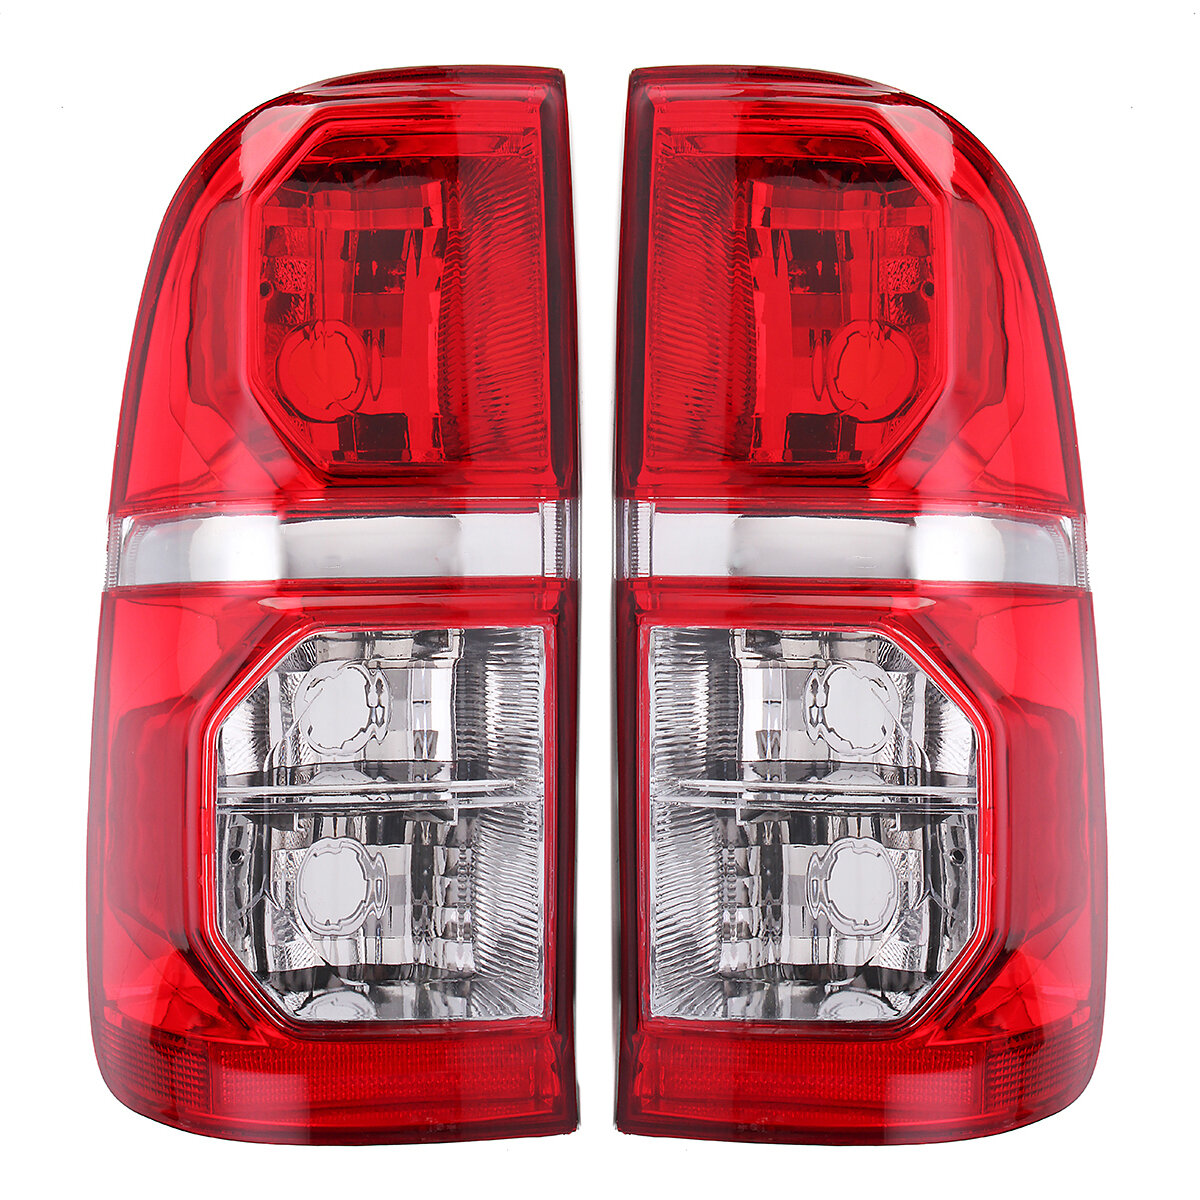 Car Rear Left/Right Tail Light Brake Lamp Red withou Bulb For Toyota Hilux 2005-2015